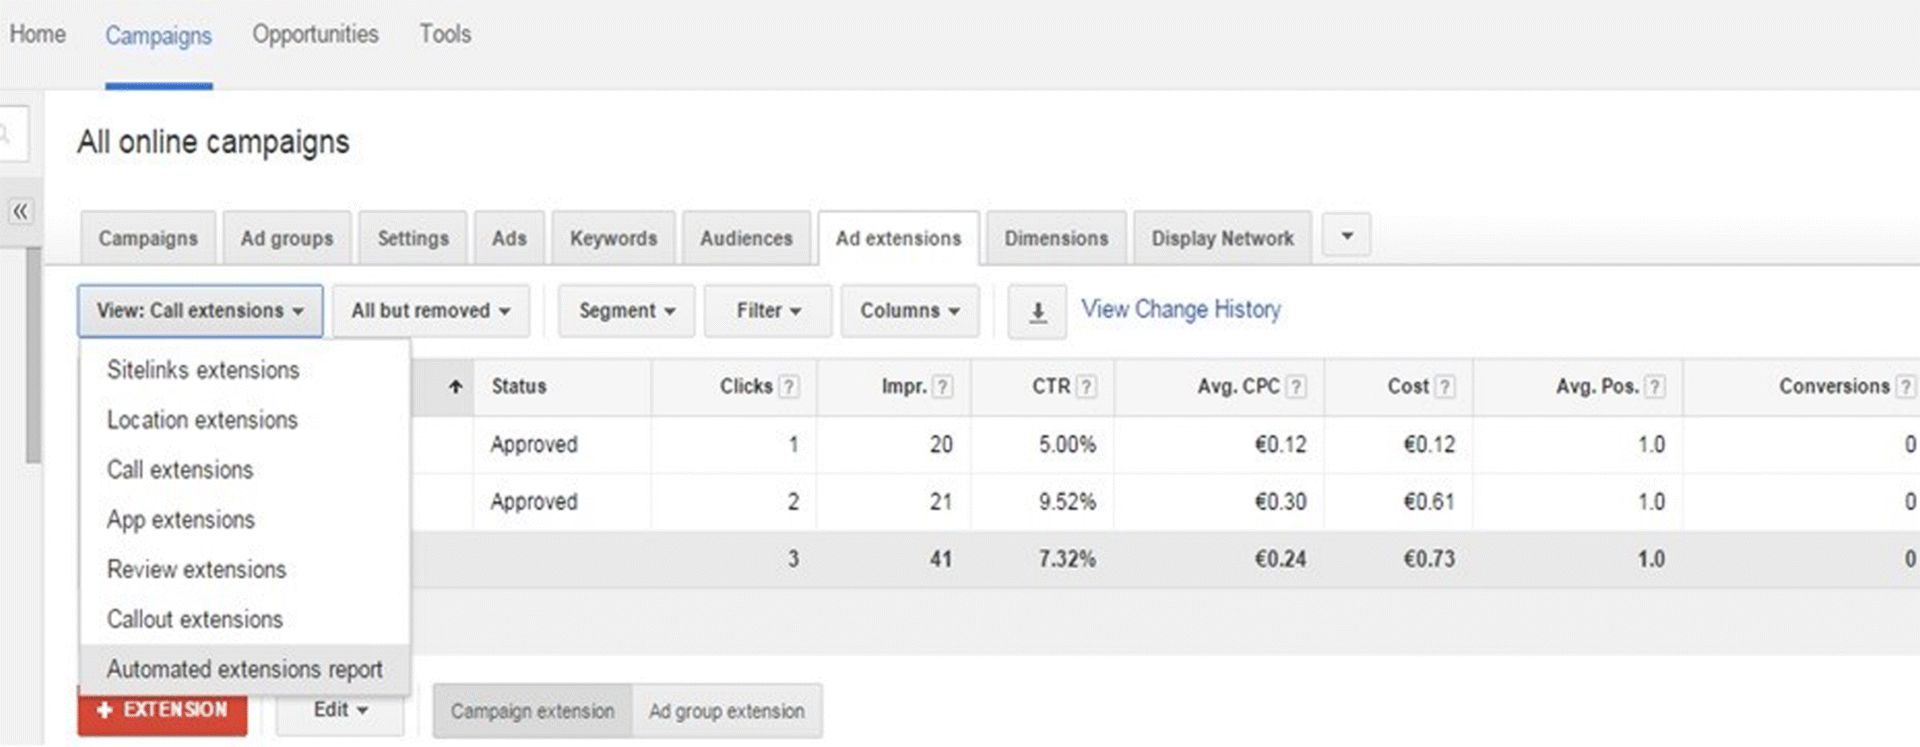 A screenshot image illustrating how to create an ad extension within Google Adwords